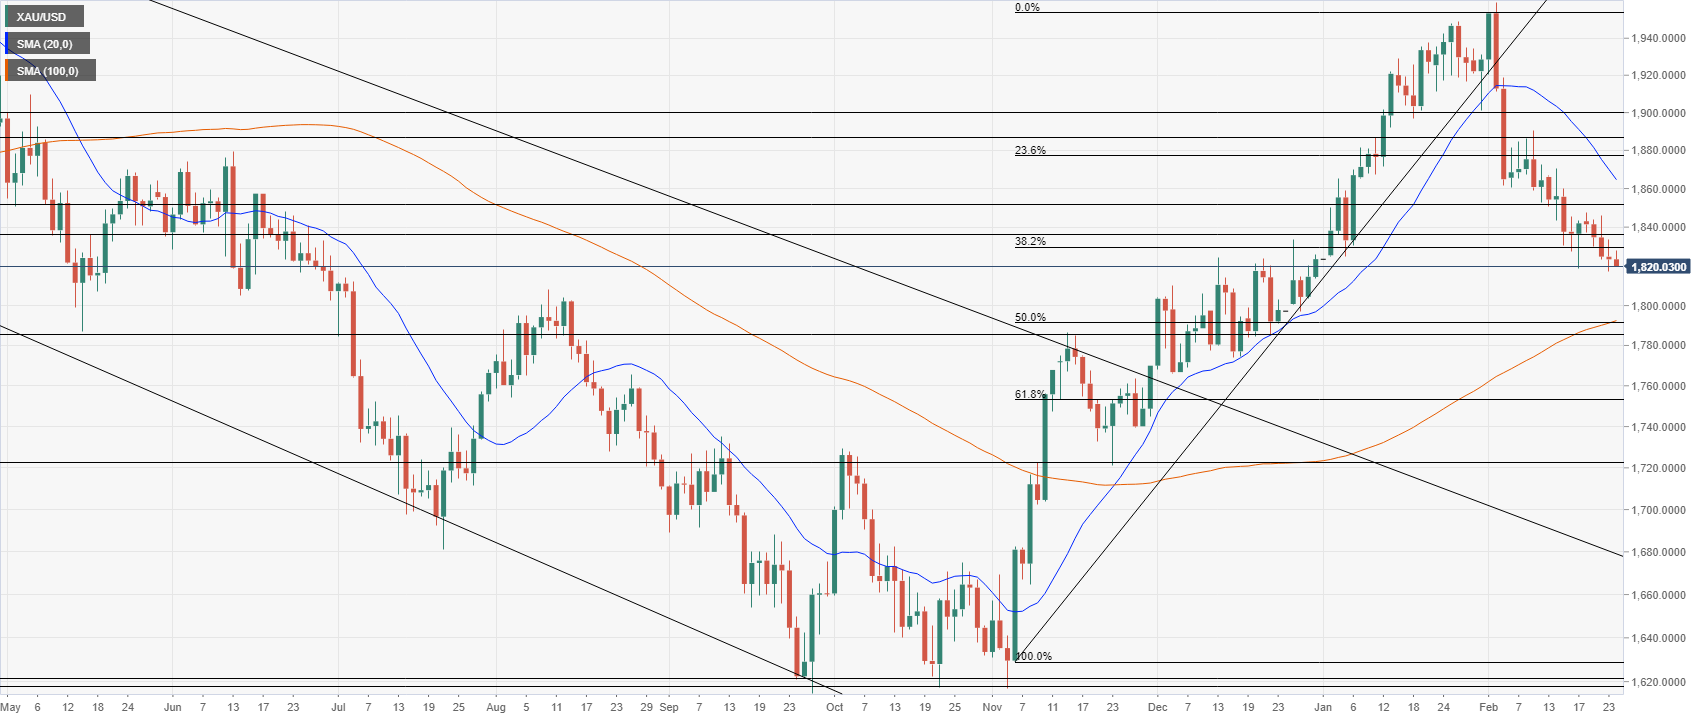 Gold Price Forecast: Relentless downtrend ahead of crucial US PCE inflation release